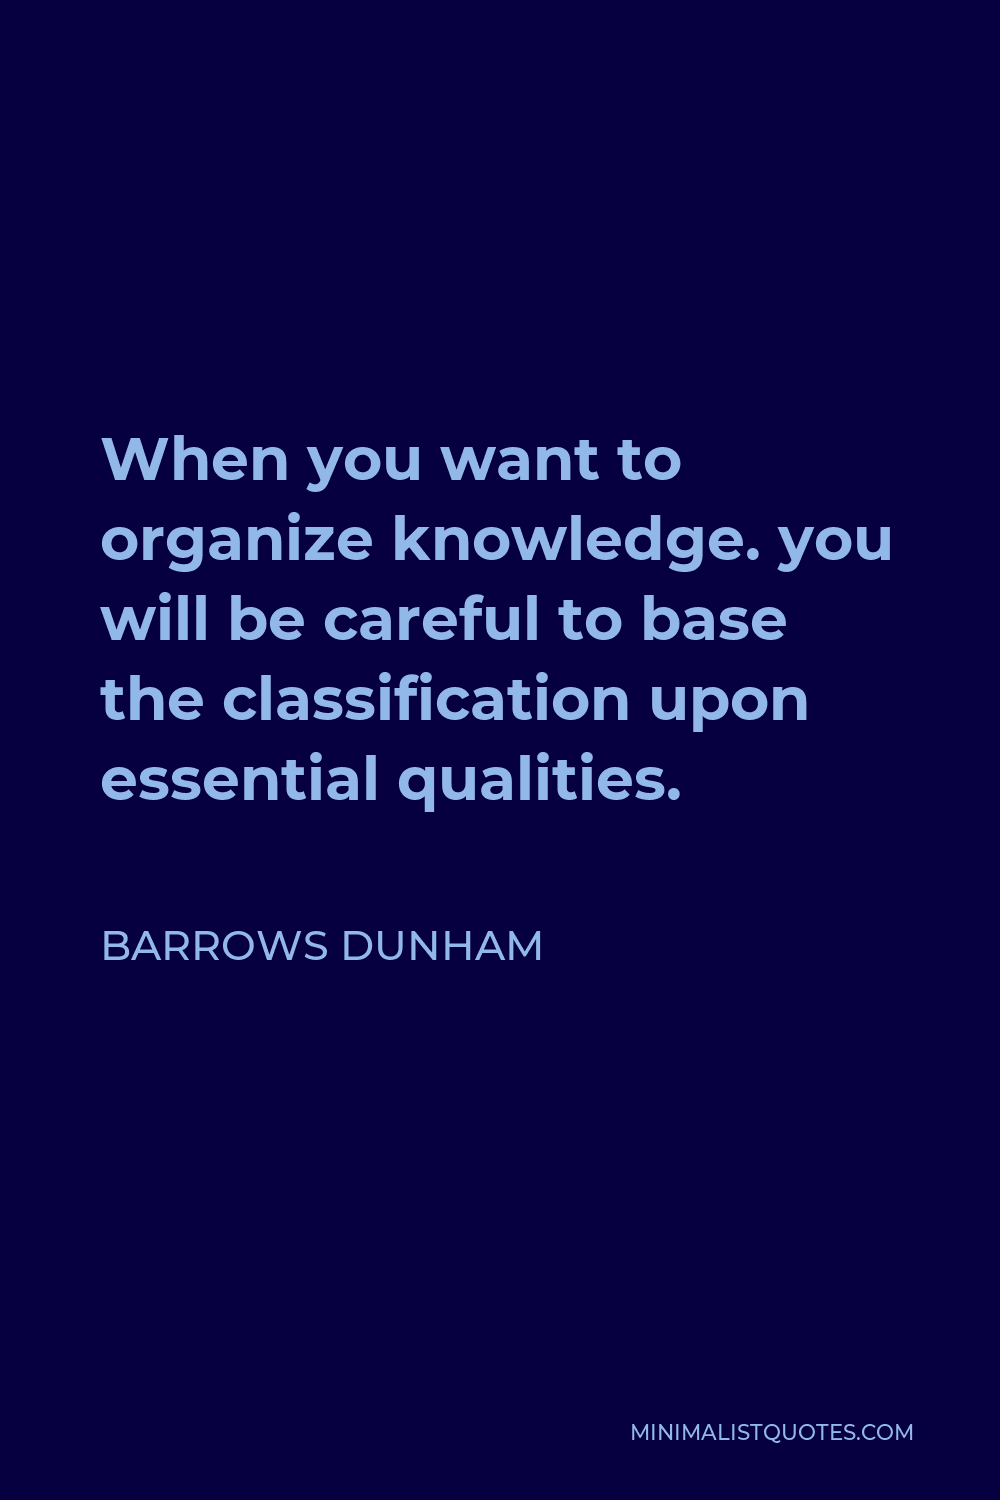 Barrows Dunham Quote - When you want to organize knowledge. you will be careful to base the classification upon essential qualities.